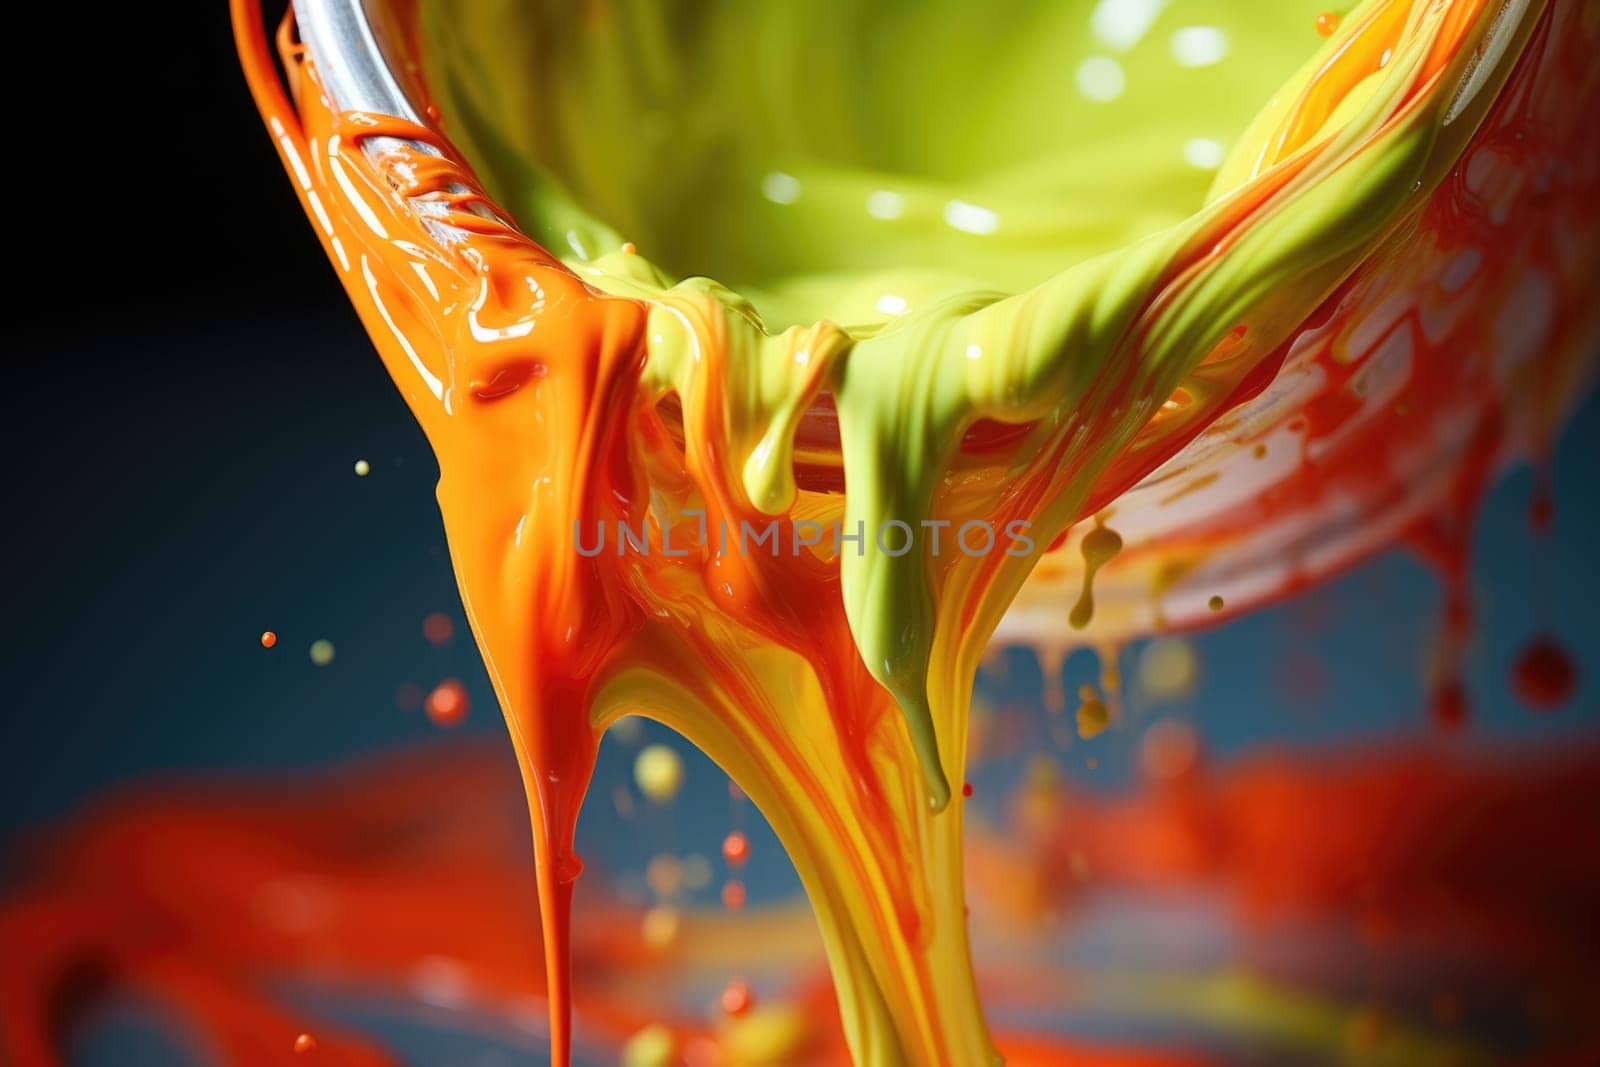 Paint of different colors pours out of one can. Tinting.